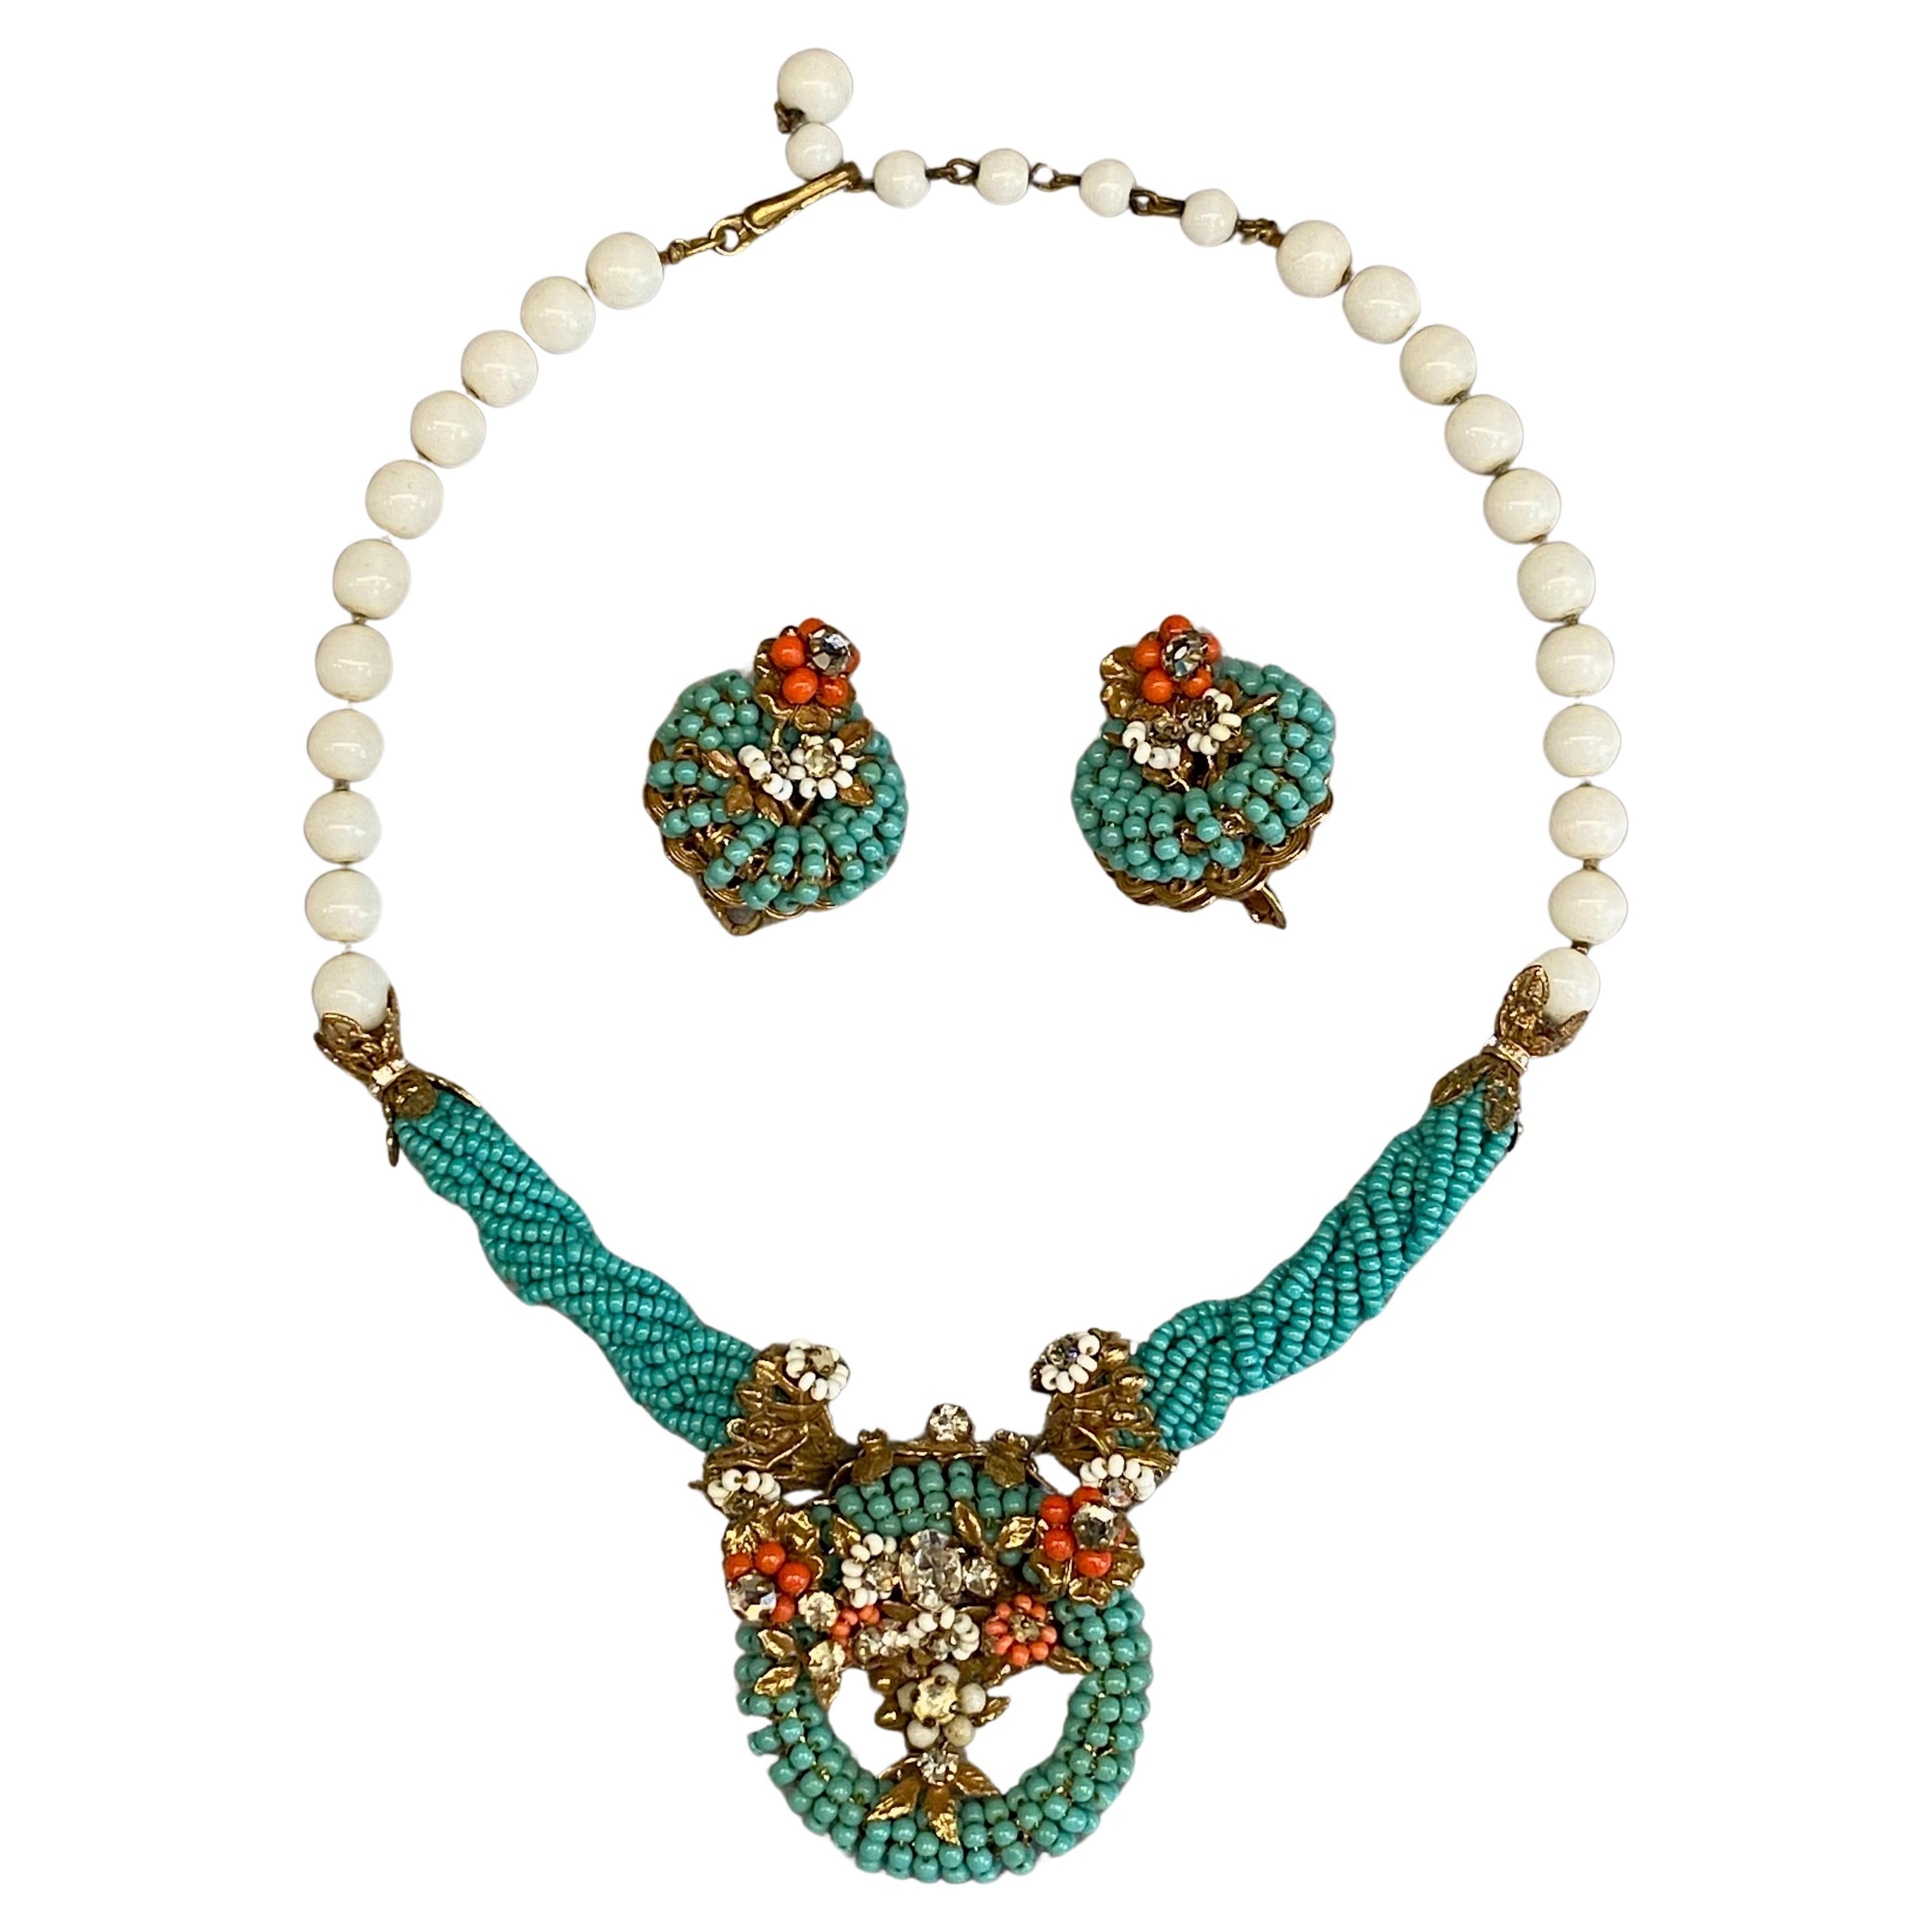 Original by Robert 1950s turquoise, coral & white glass beed necklace & earrings For Sale